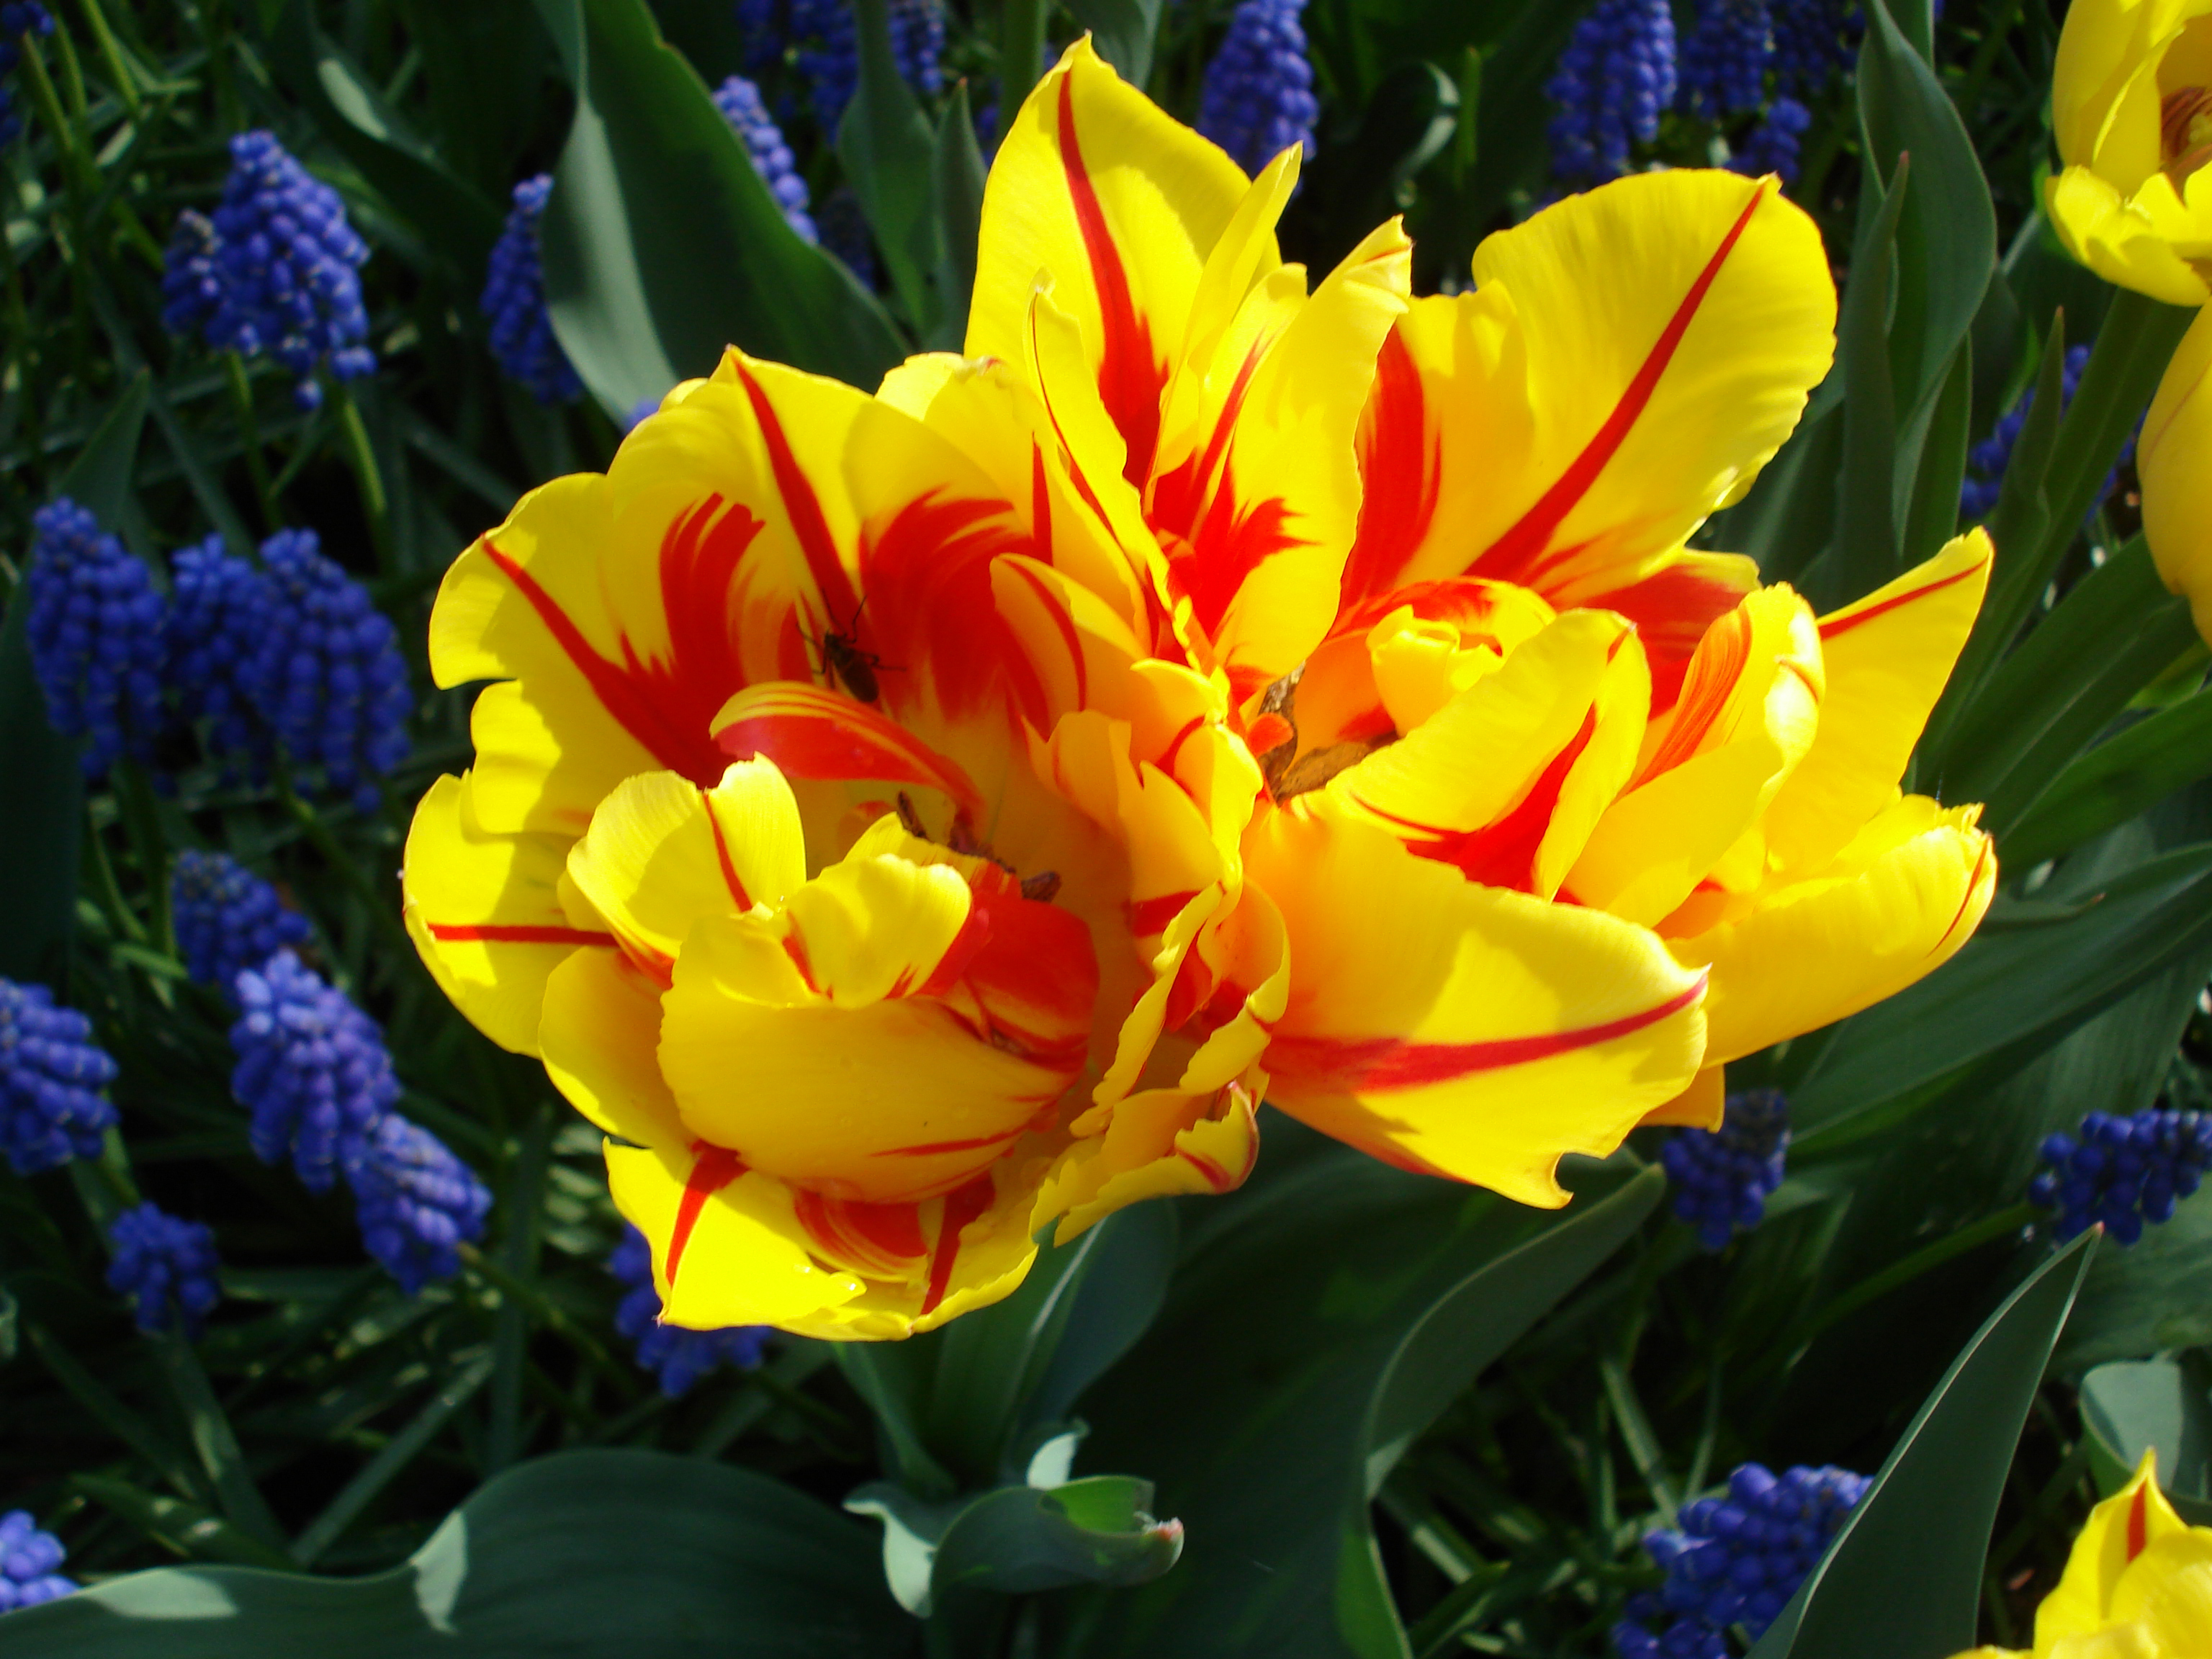 Living on Earth: Creating Tulips